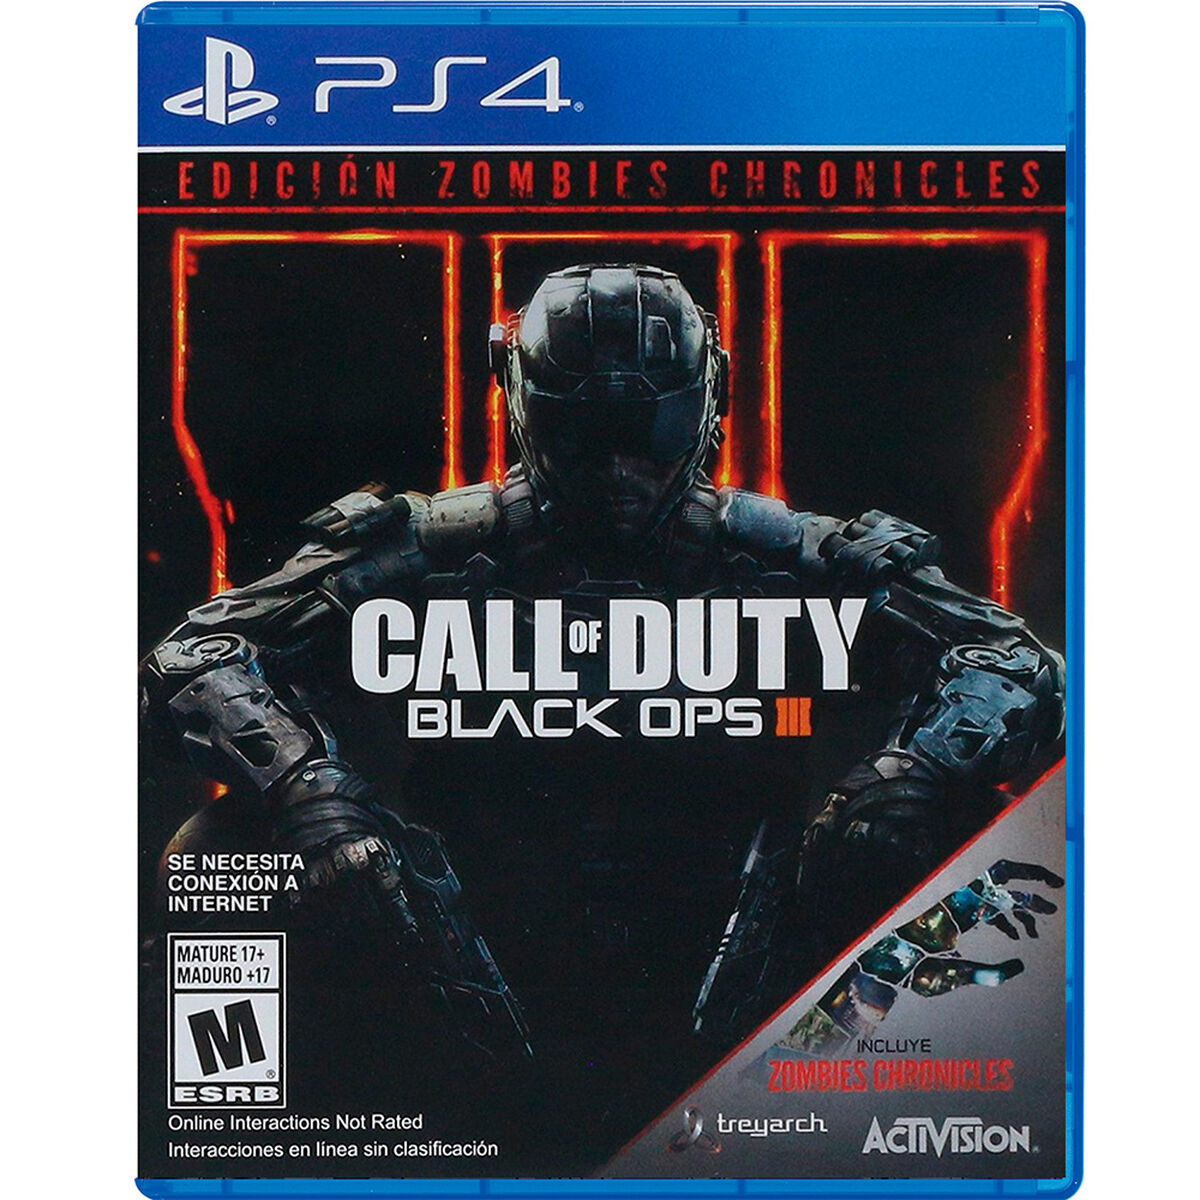 Juego PS4 Call of Duty Black Ops III Zombies Chronicles PS4